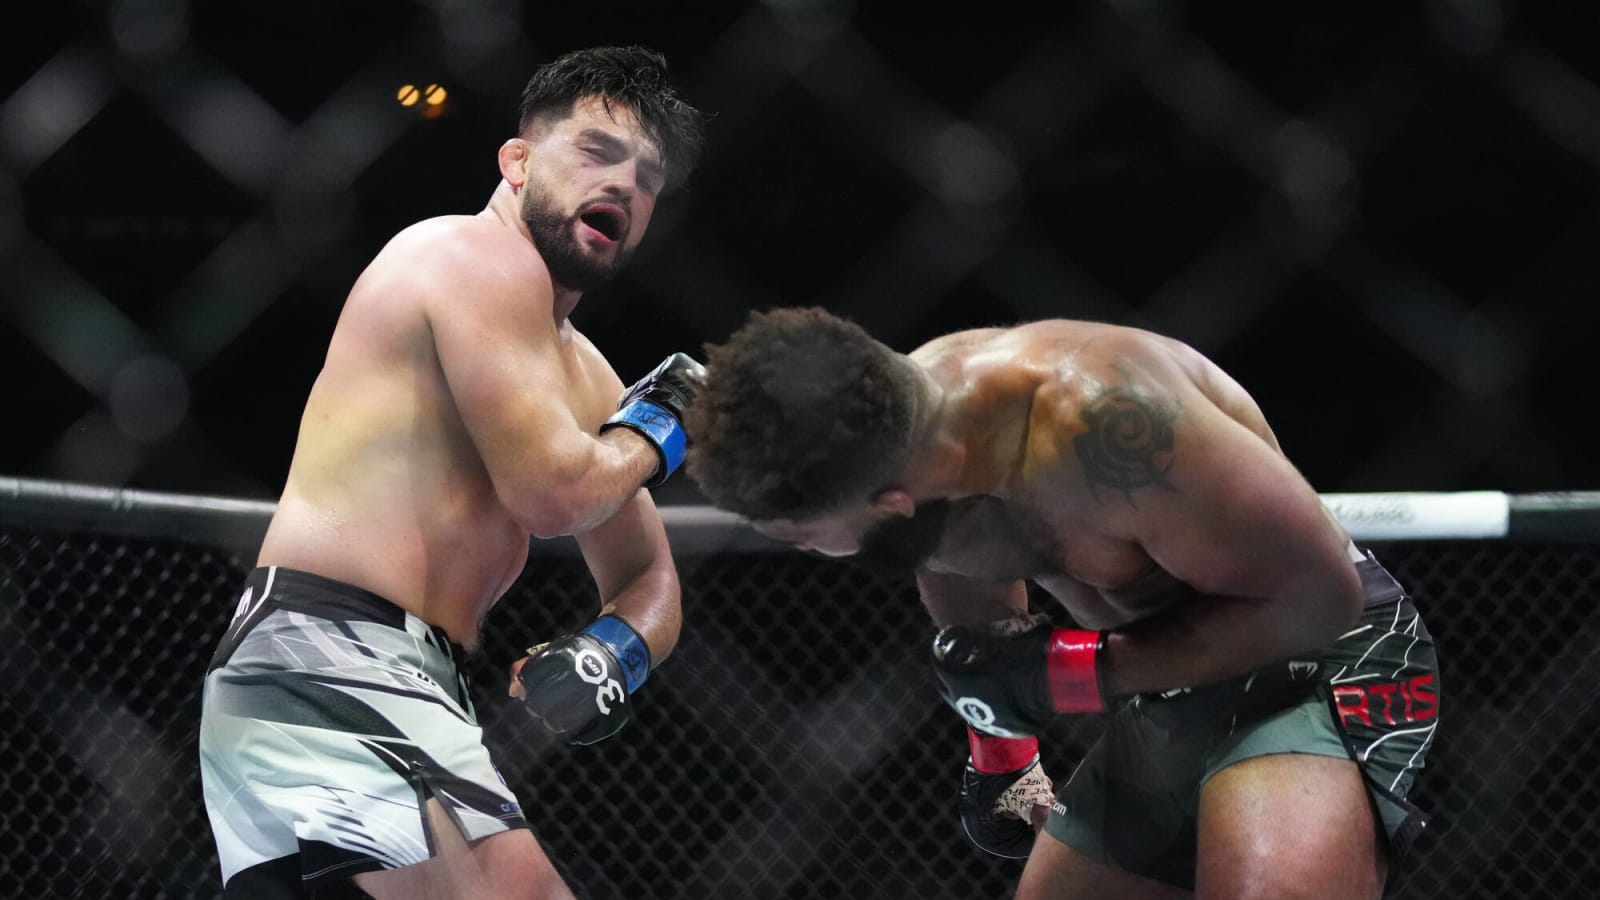 After his big win at UFC 287, who is next for Kelvin Gastelum?